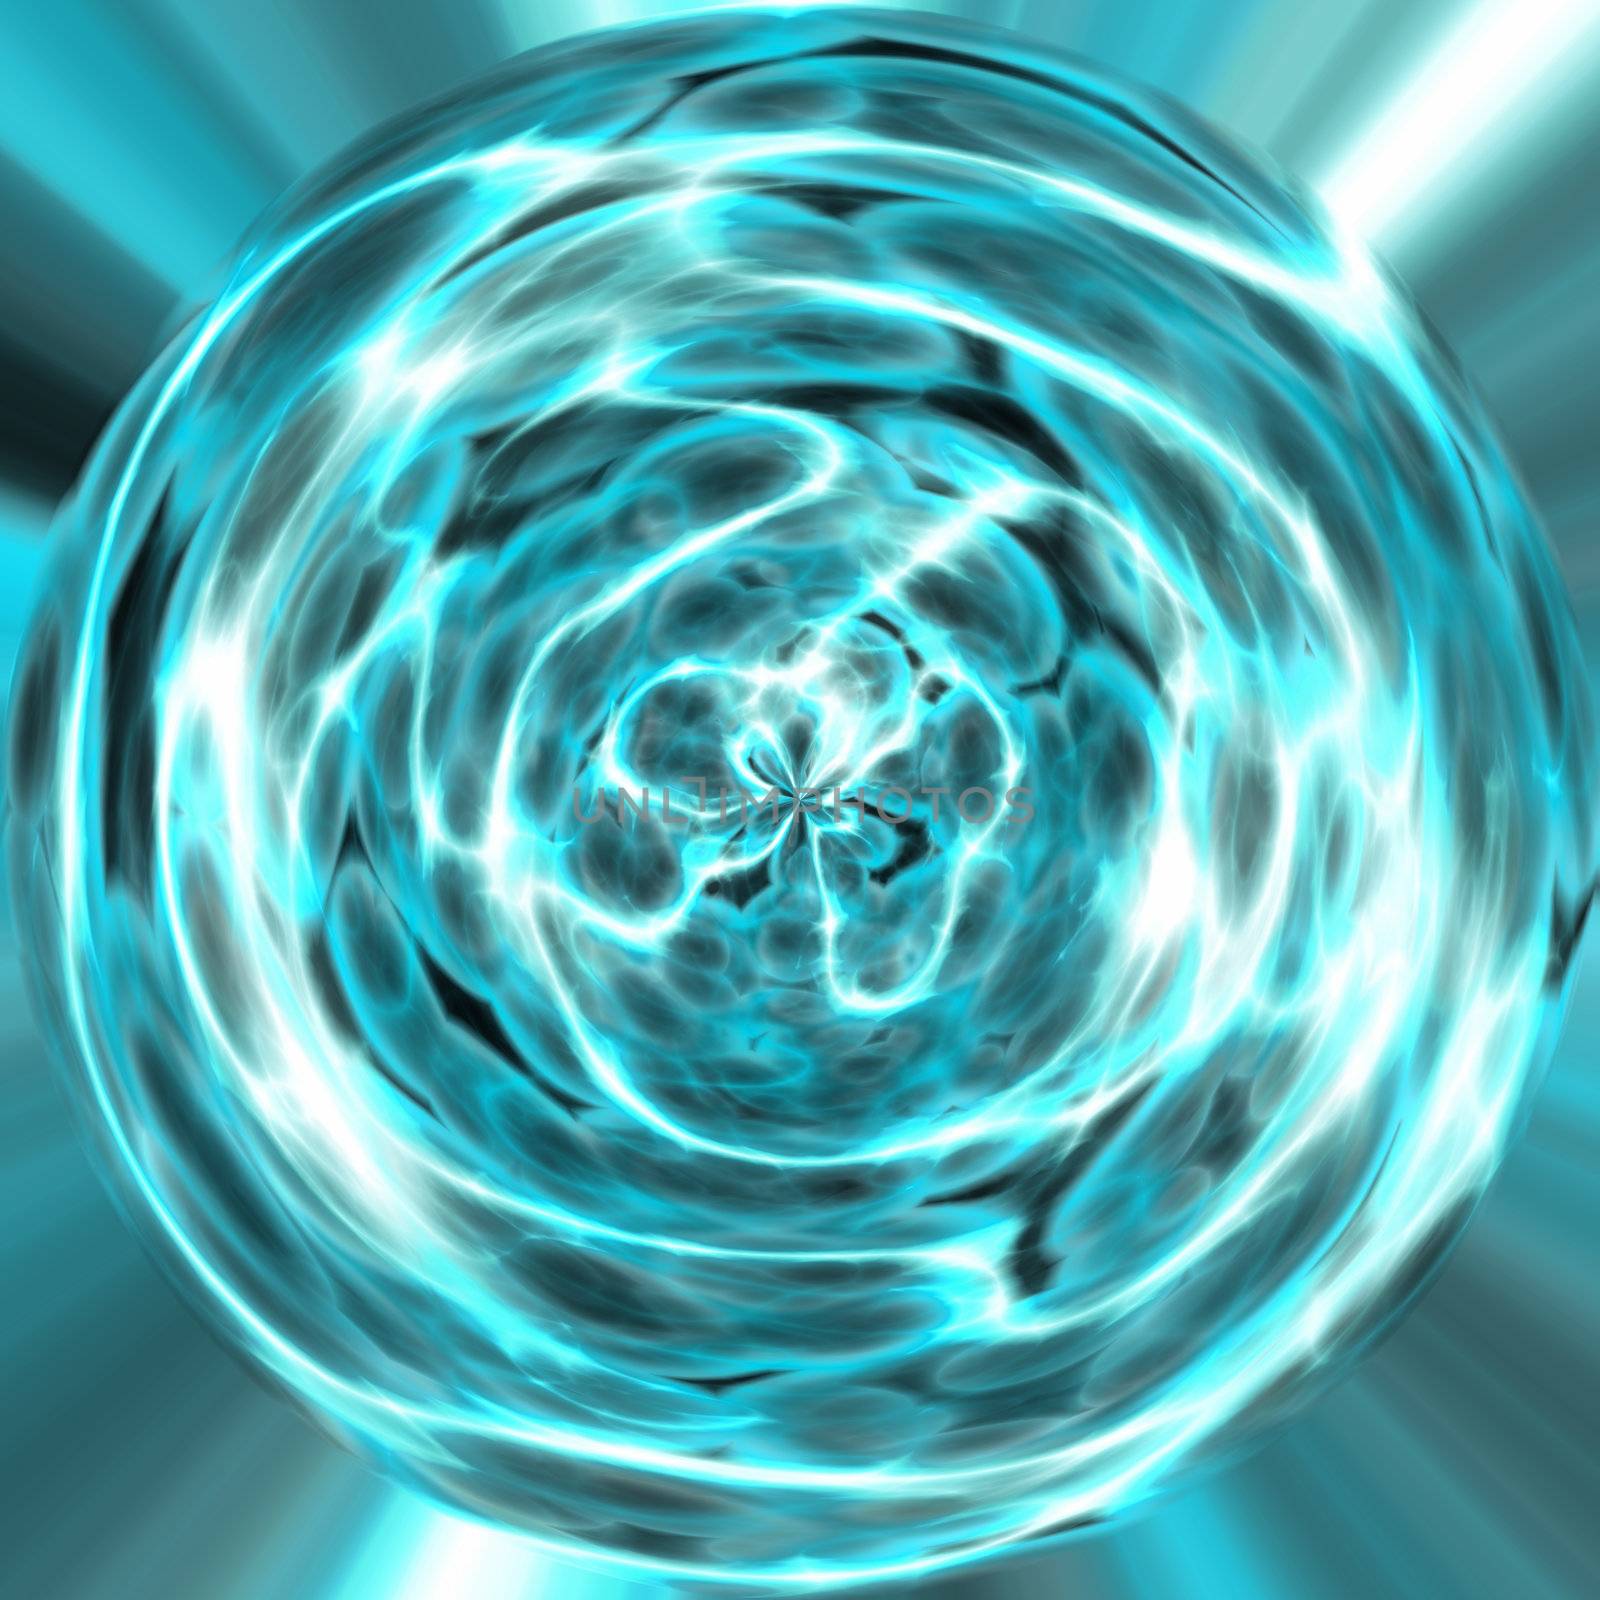 image of an arcing electric orb or sphere